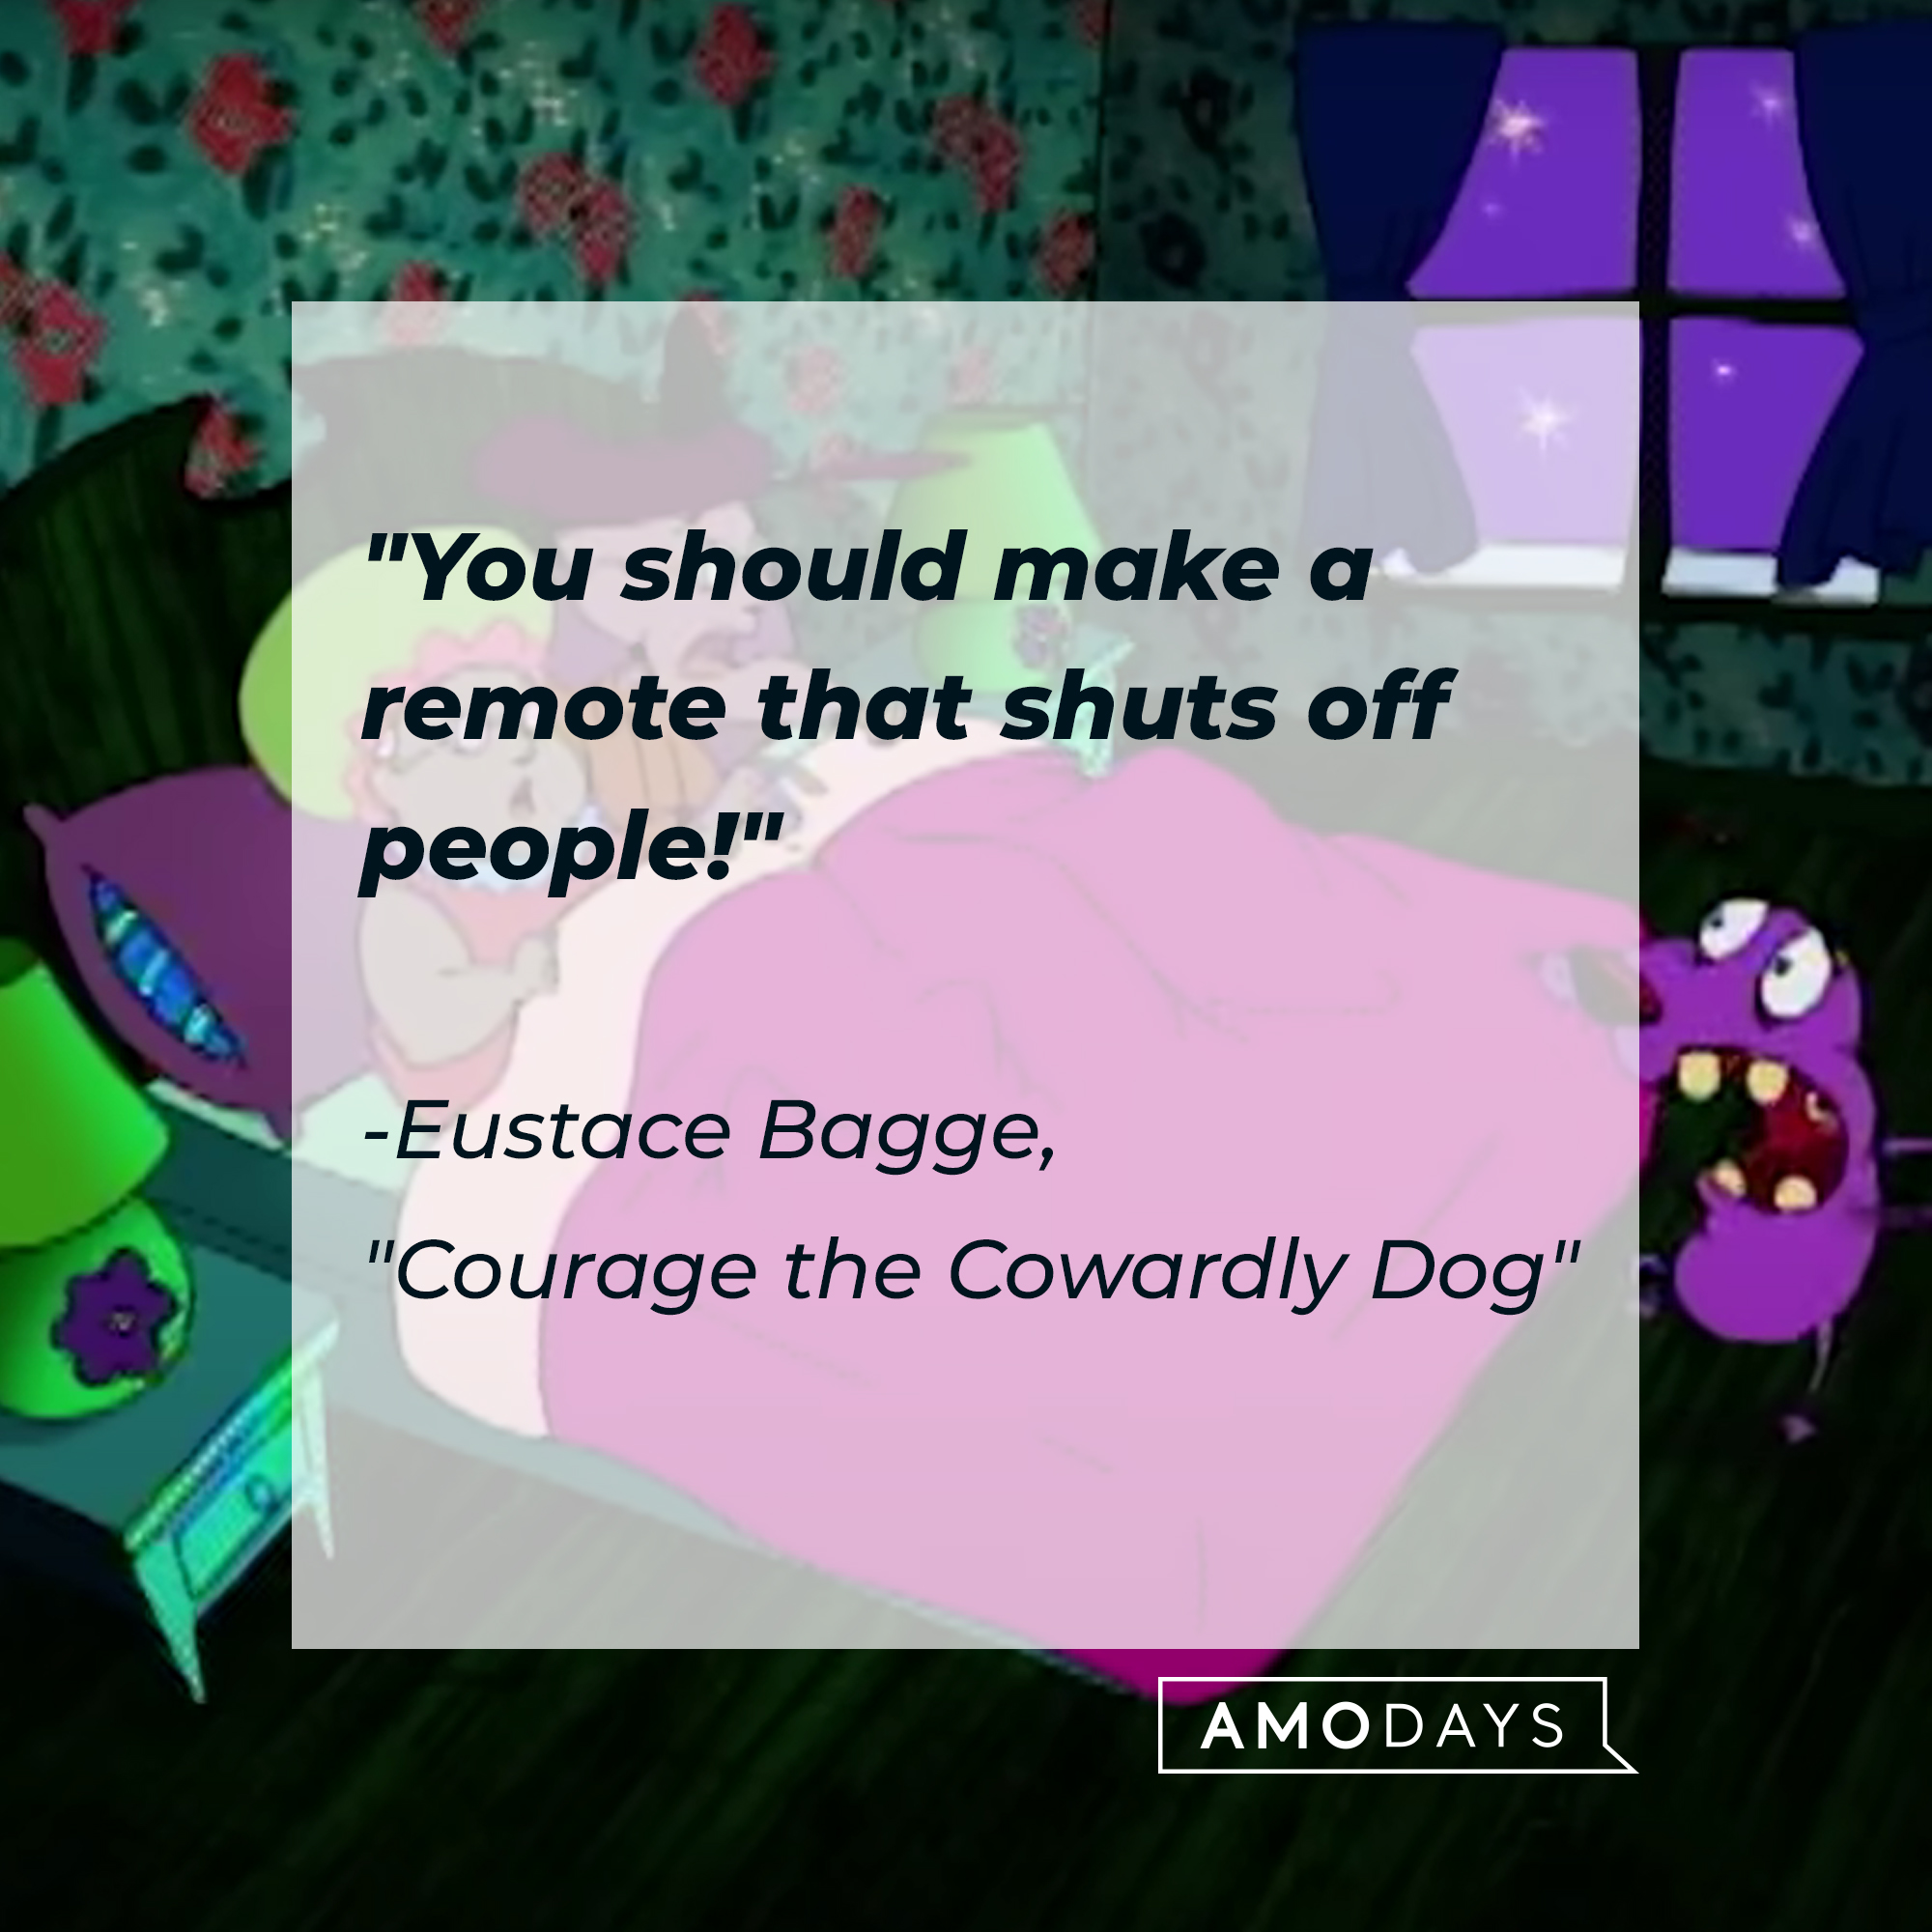 Eustace's quote: "You should make a remote that shuts off people!" | Source: Facebook.com/CartoonNetwork